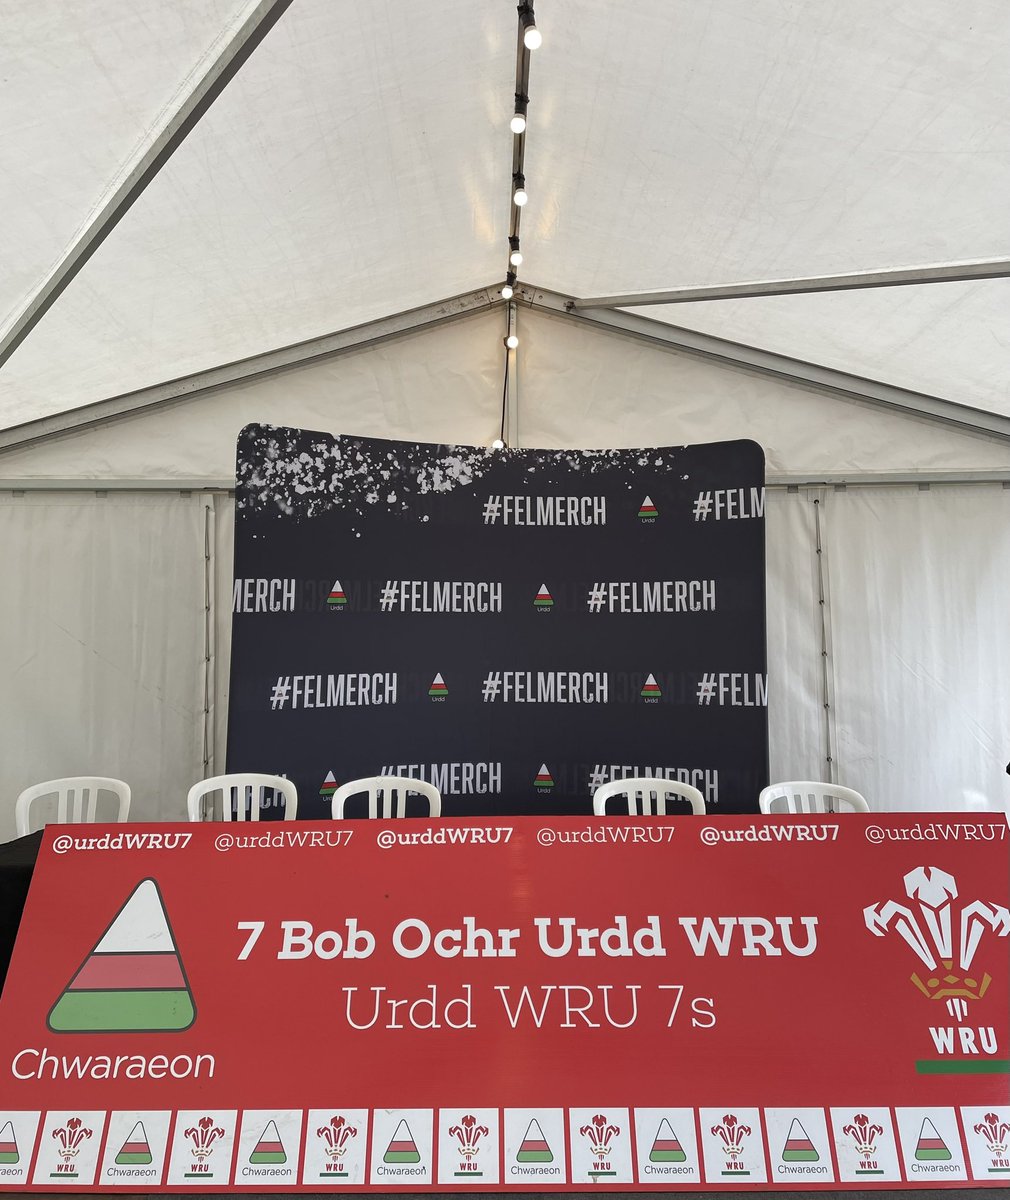 Bydd rhai o garfan merched rygbi merched yn dod draw heddiw rhwng 4-5! 👀 Dewch draw i'r babell am lun a phoster wedi ei llofnodi!✍️ Some of the Wales women’s rugby squad will be here between 4-5!👀 Come over to the tent for a picture and a signed poster!✍️ #UrddWRU7